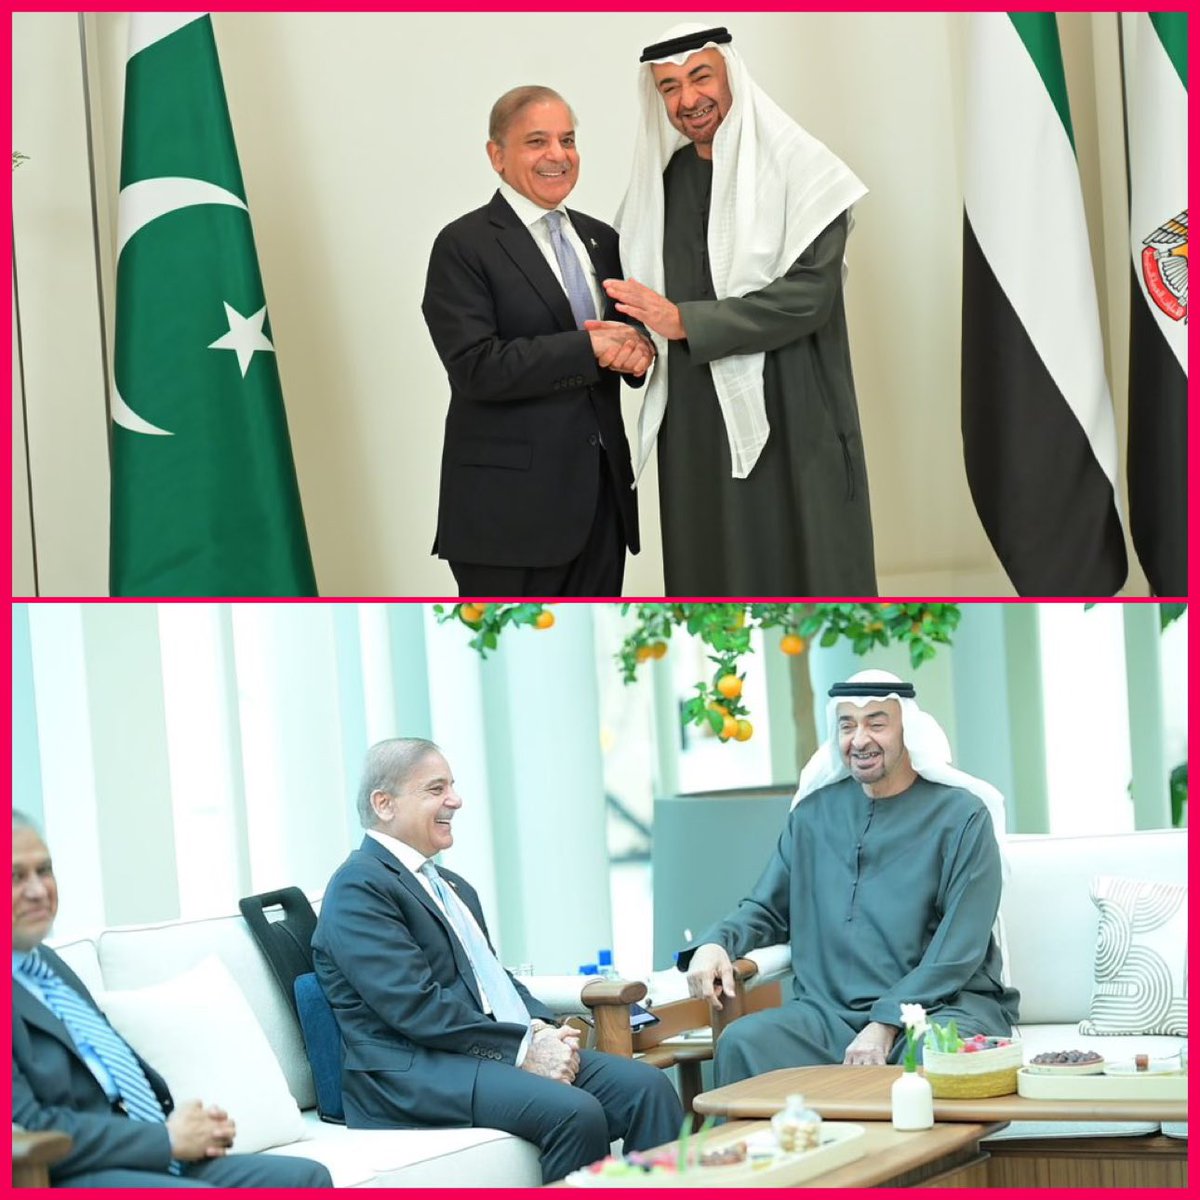 When two BEST FRIENDS meet! 🇵🇰🫶🏼🇦🇪
This is how all muslim world leaders, including @MohamedBinZayed, President of the UAE, meet Prime Minister Shehbaz Sharif. Why? Because they’re impressed by his linguistic, administrative and developmental skills. They all want to be like him.